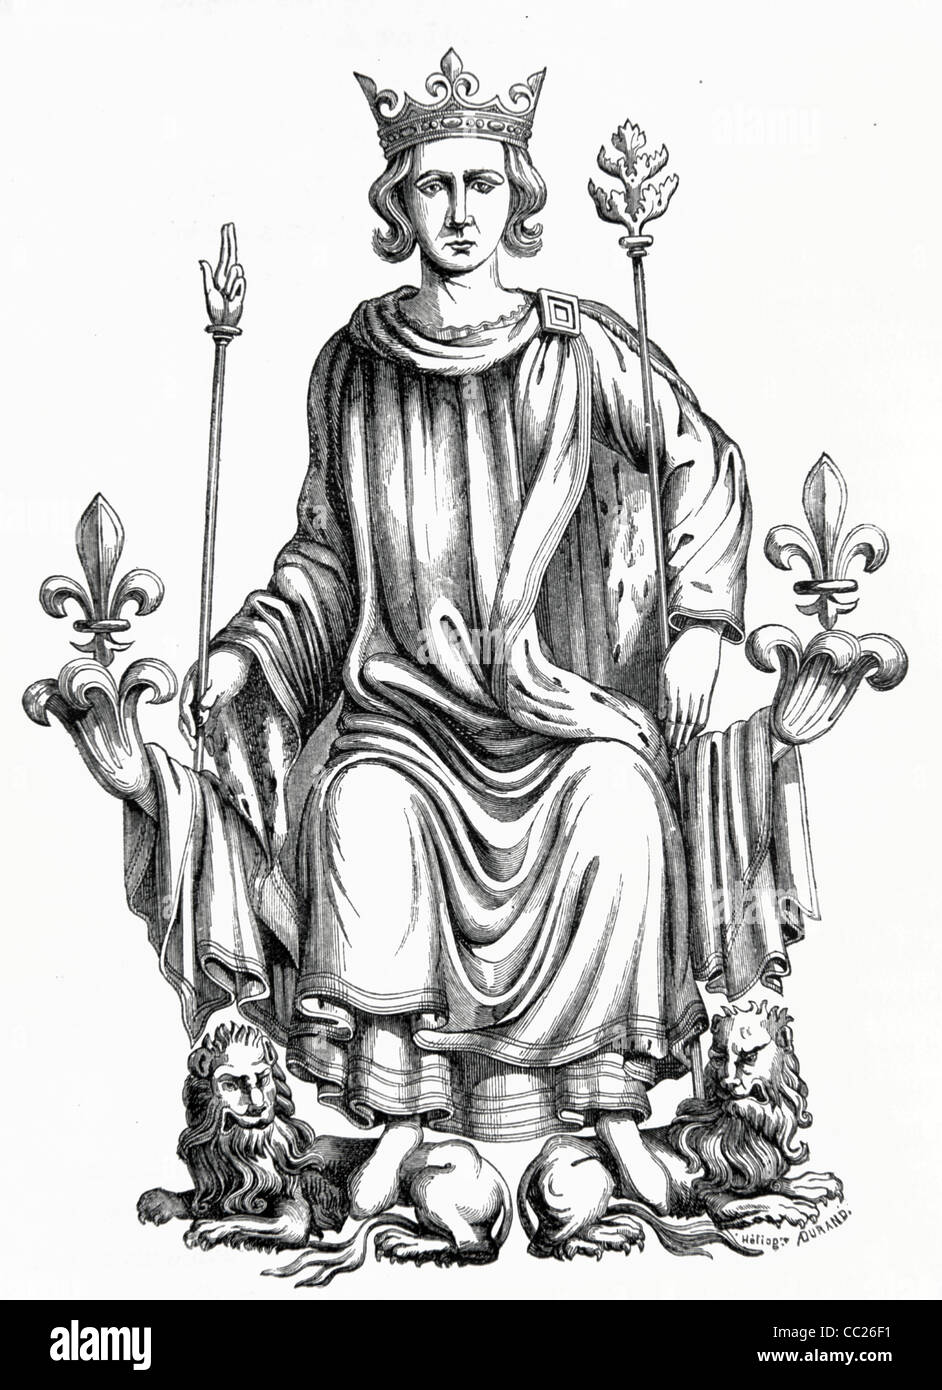 Charles VI of France (1368-1422) Sitting on French throne, King of France (1380-1422). Vintage Illustration or Engraving Stock Photo